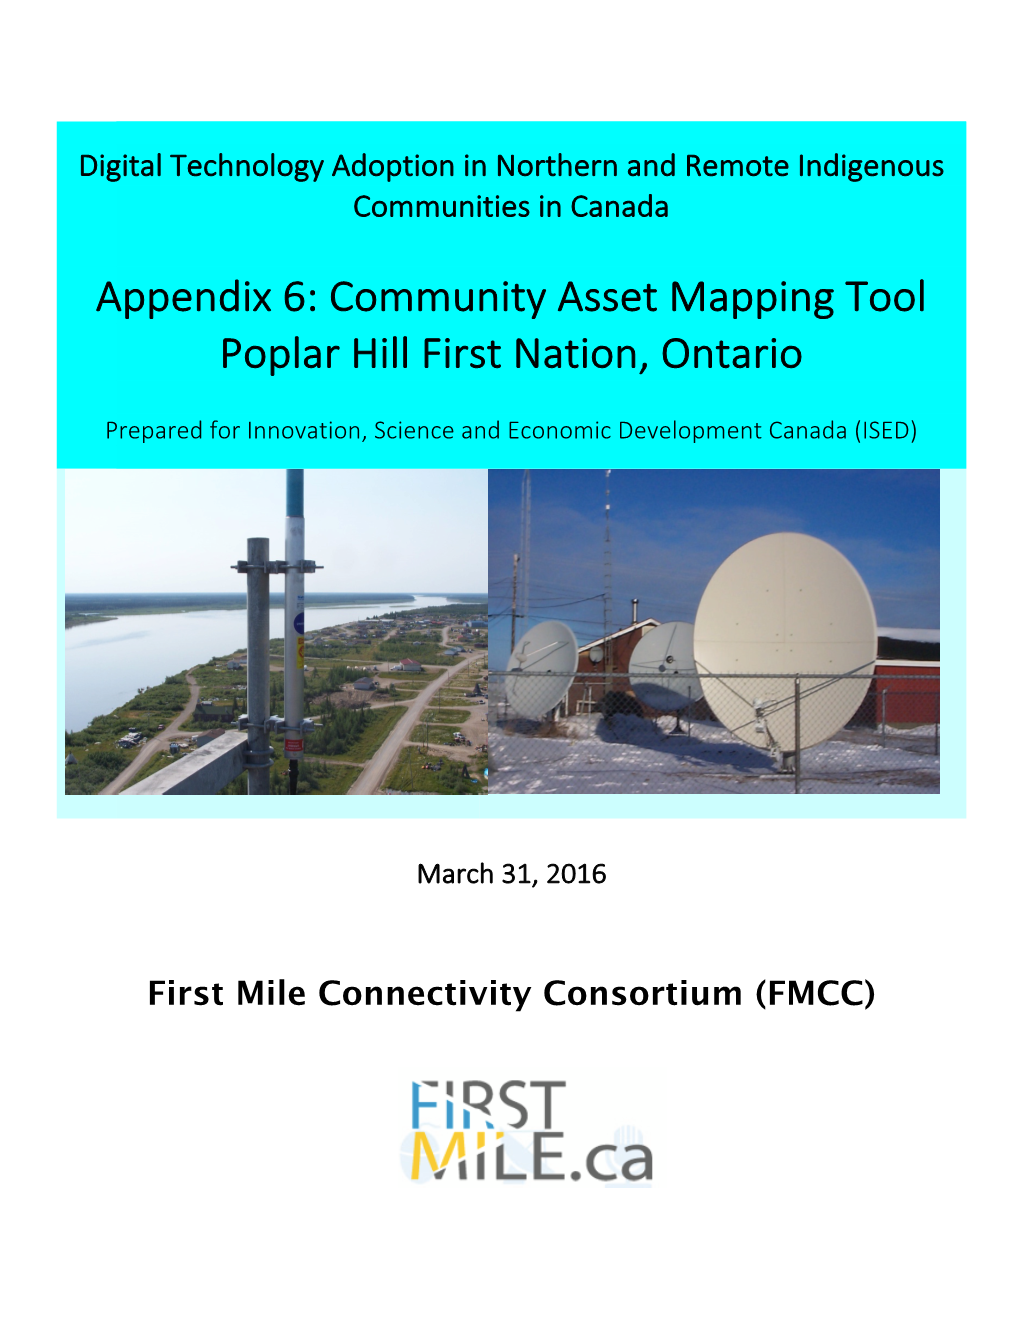 Community Asset Mapping Tool Poplar Hill First Nation, Ontario